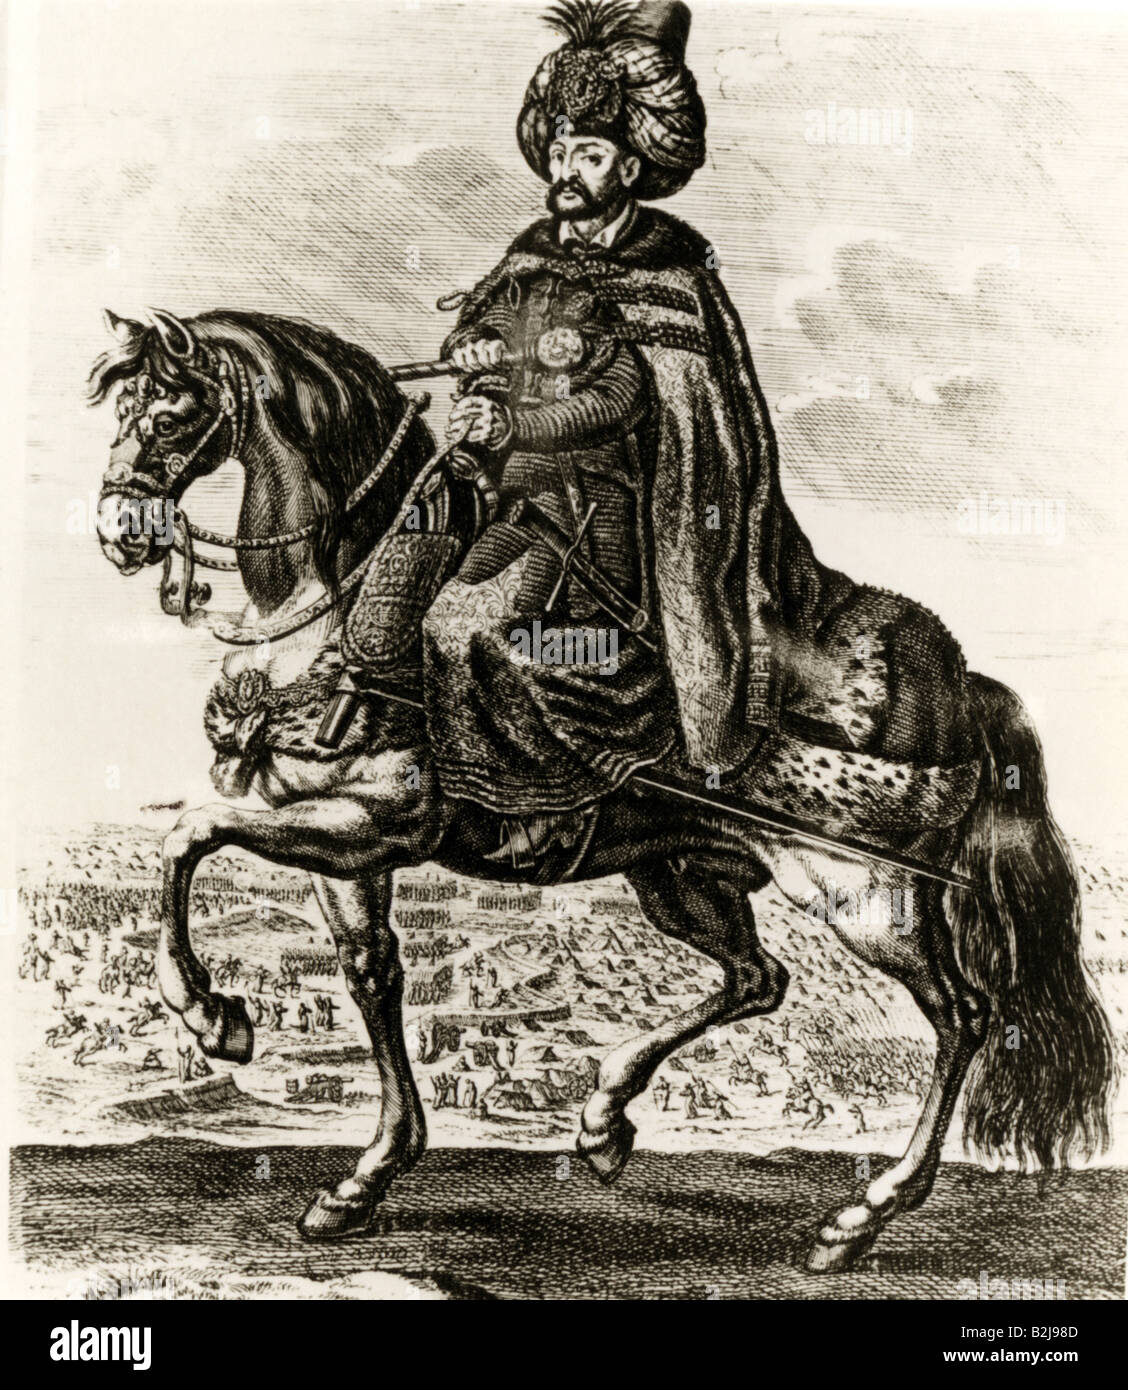 Köprülü, Fazil Ahmed, 1626 - 30.10.1676, Ottoman politician, Grand Vizier of the Ottoman Empire 1661 - 1676, equestrian image, engraving, 17th century, , Artist's Copyright has not to be cleared Stock Photo